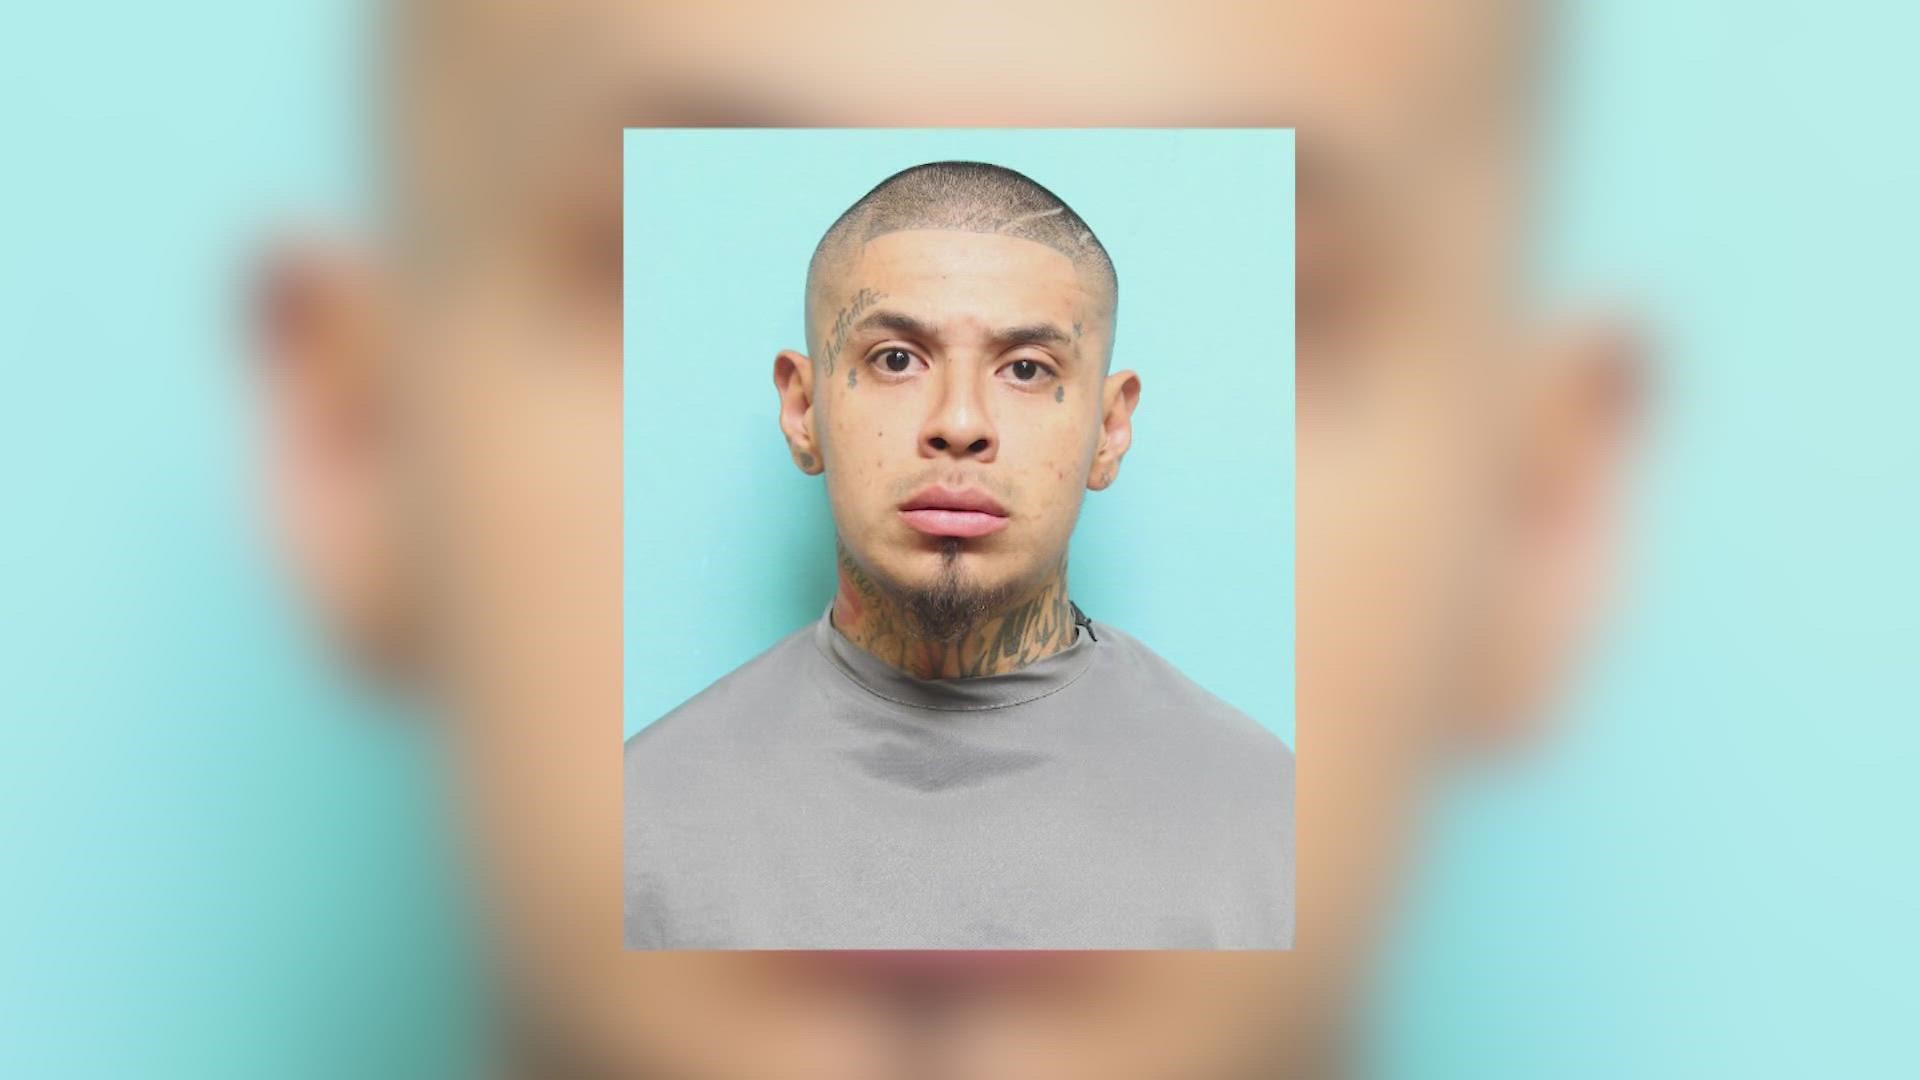 According to officials, Nestor Hernandez, a violent felon, was released on parole nearly two years early. Hernandez violated parole twice.